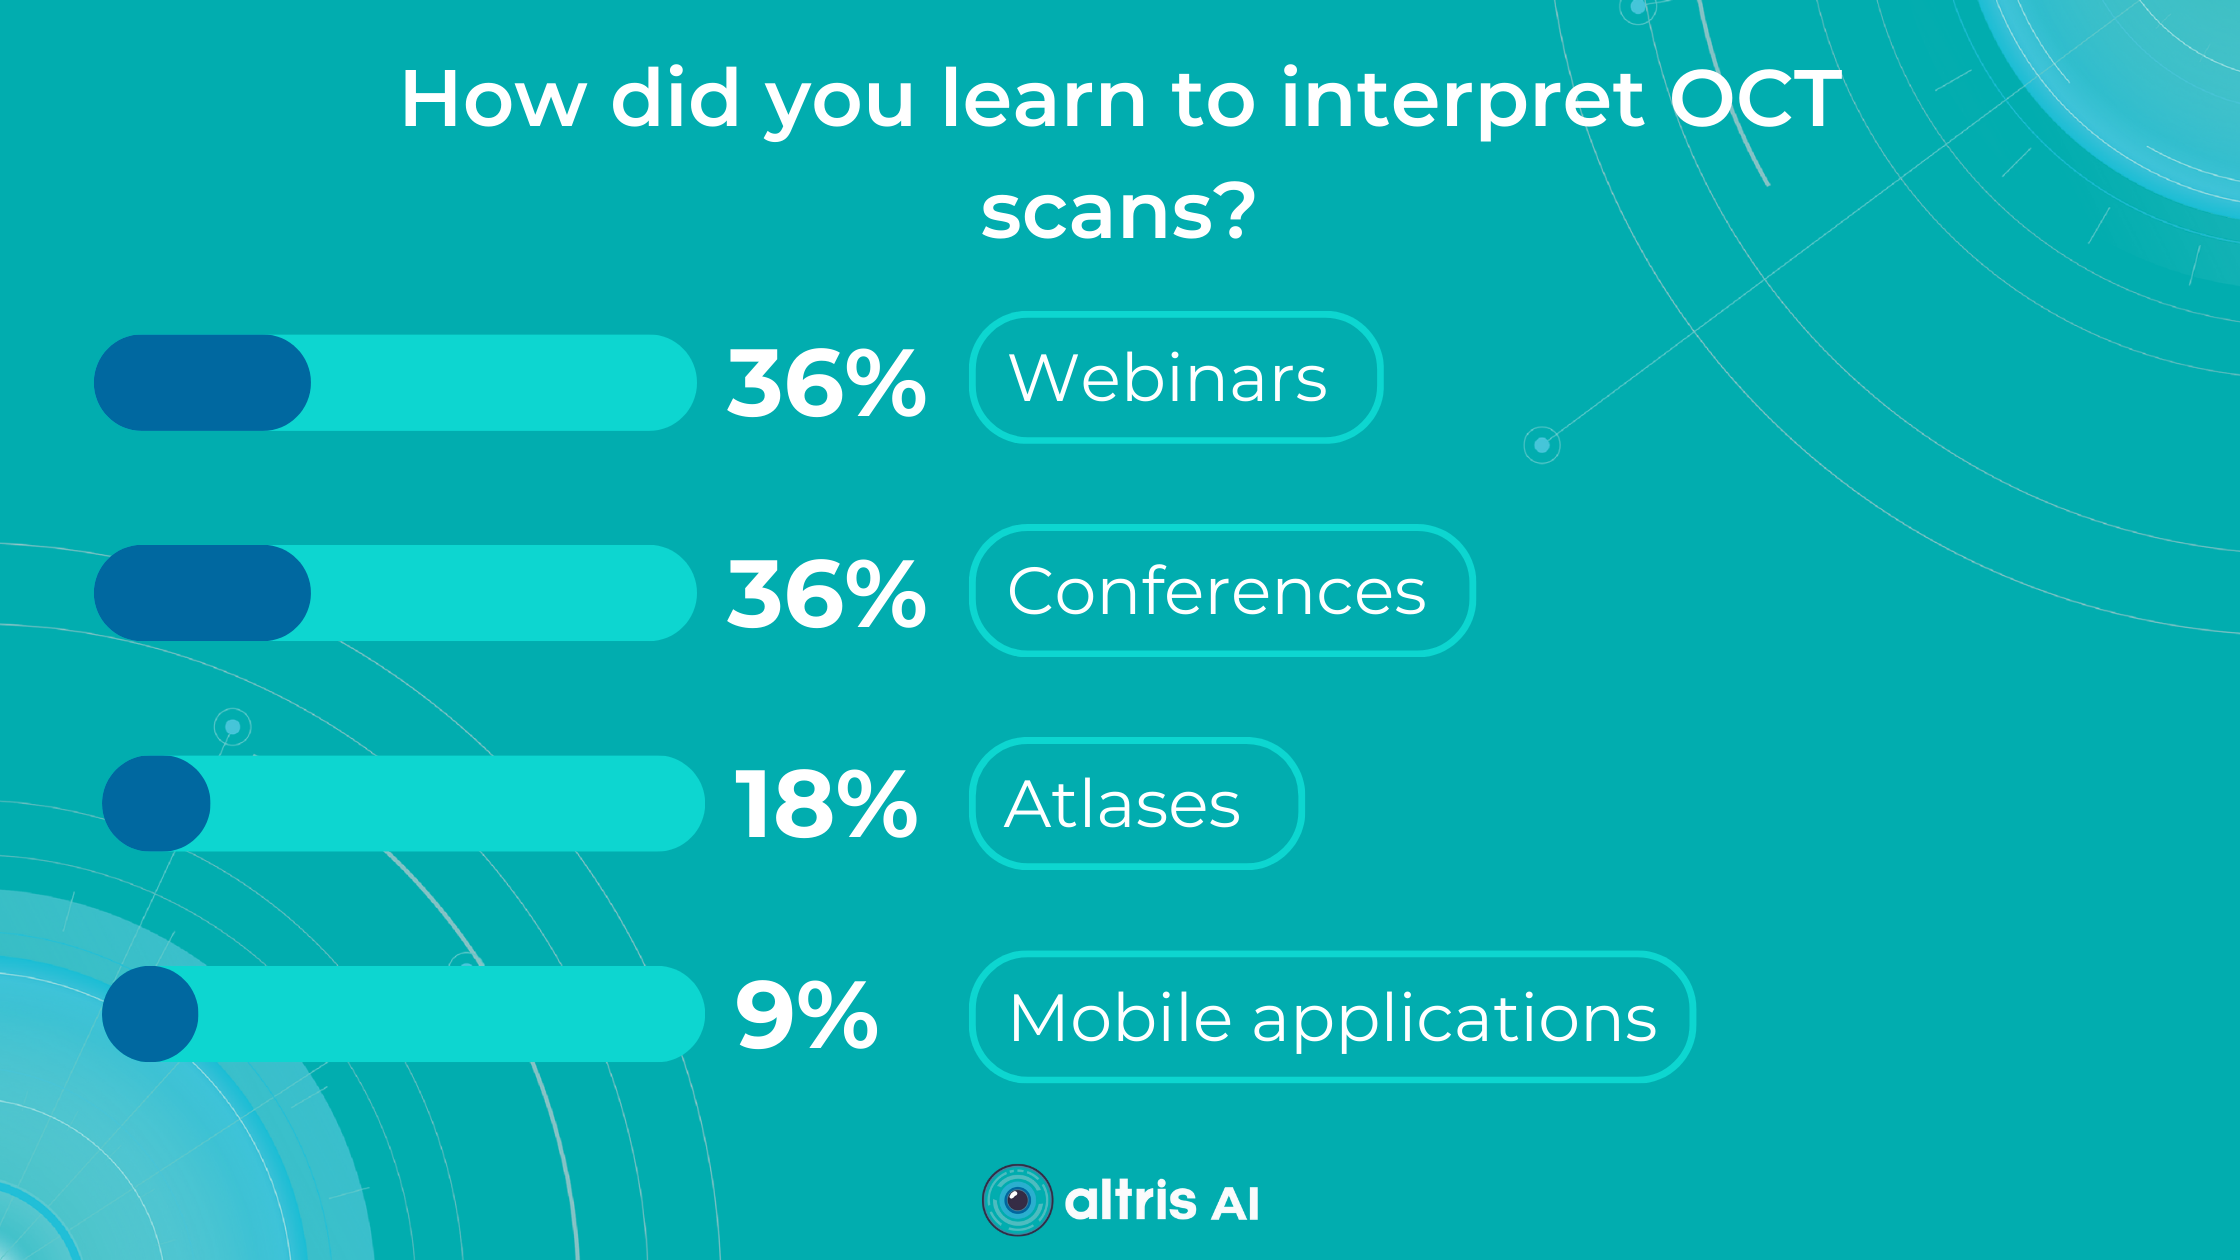 Infographics showing the results of how experts learned to interpret OCT scans